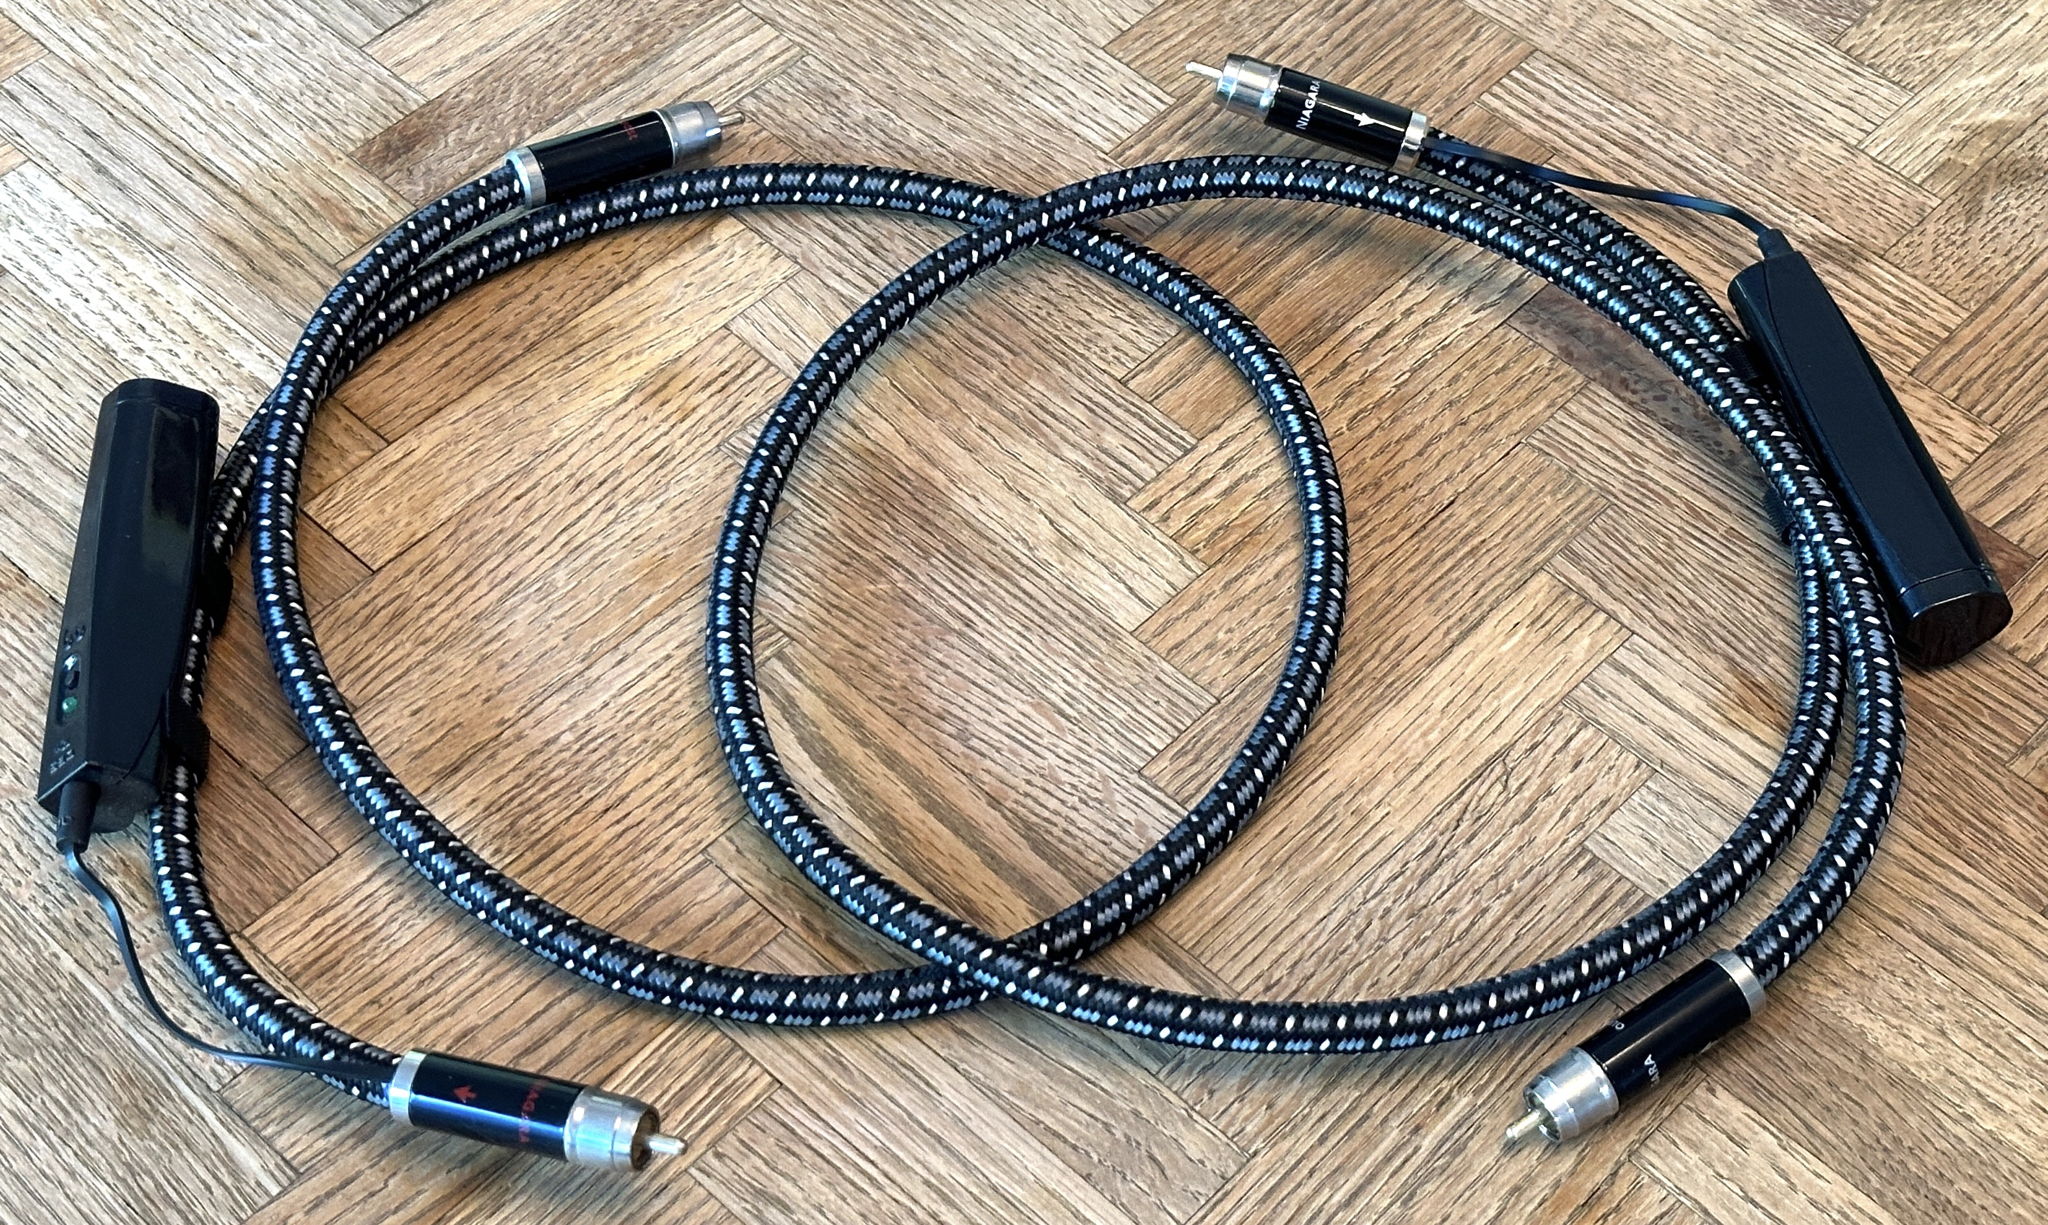 AudioQuest Niagara - 1 meter Analog Interconnect cable ... 2